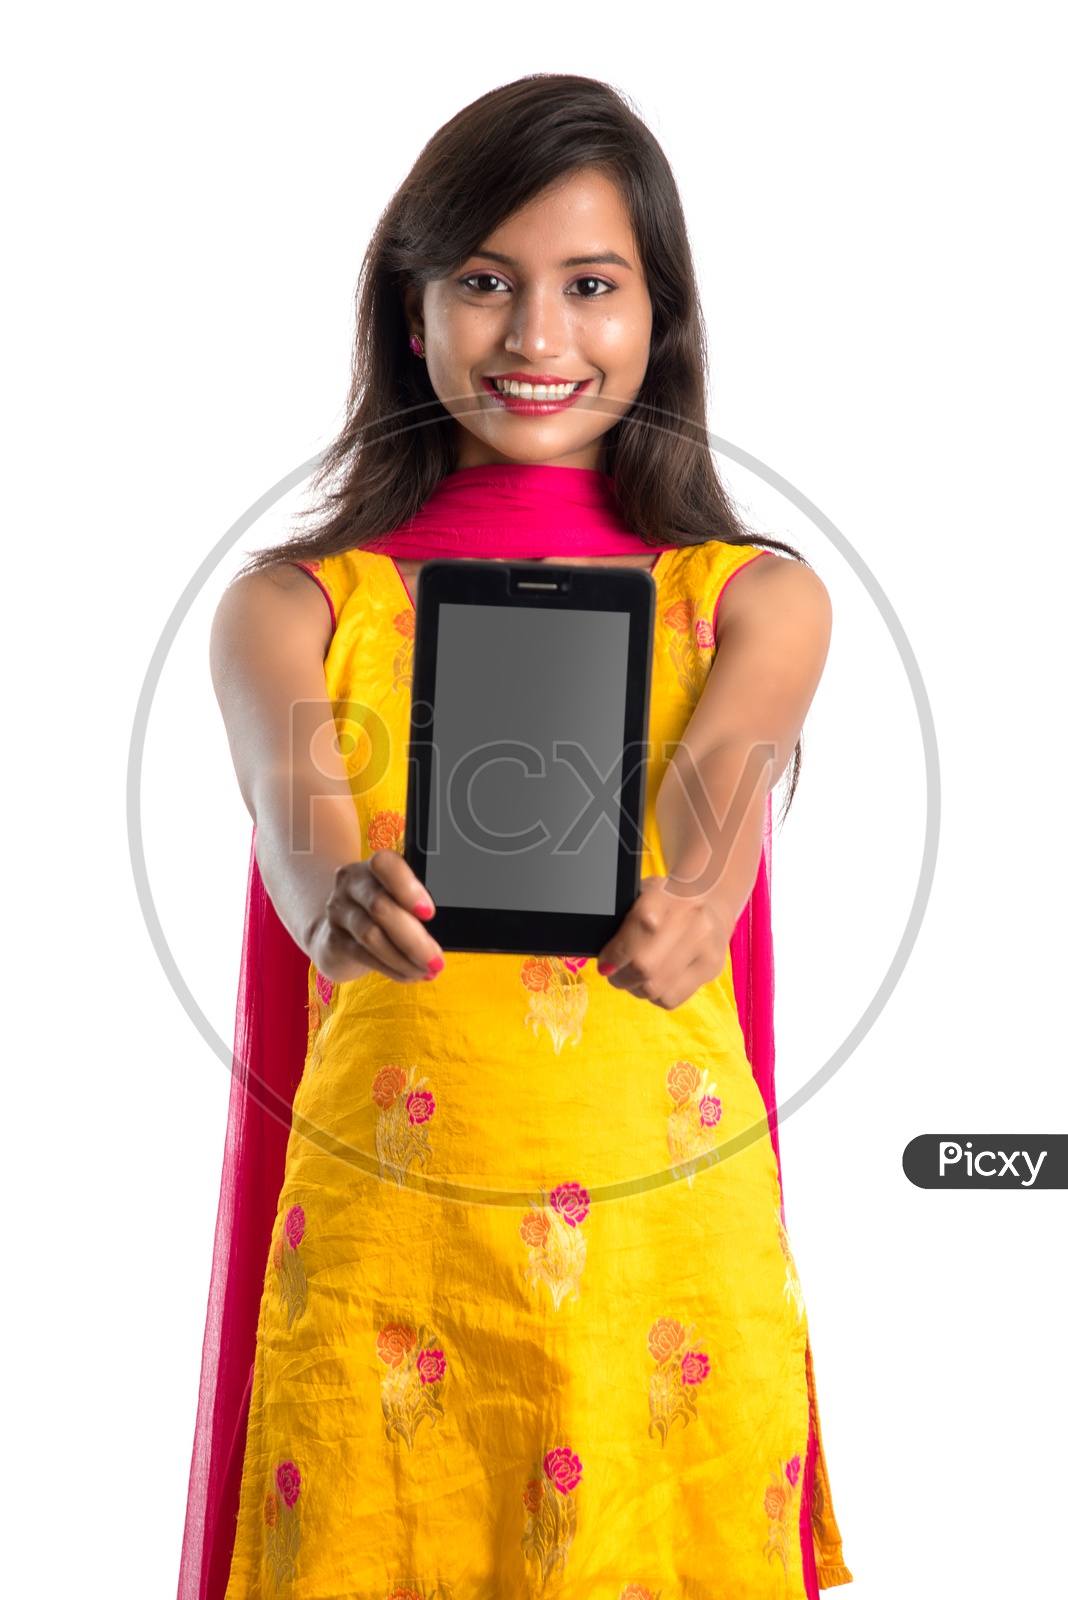 Young Indian Girl or Woman Showing Tab Or Tablet Gadget Empty Screen  With an Expression On an Isolated White Background